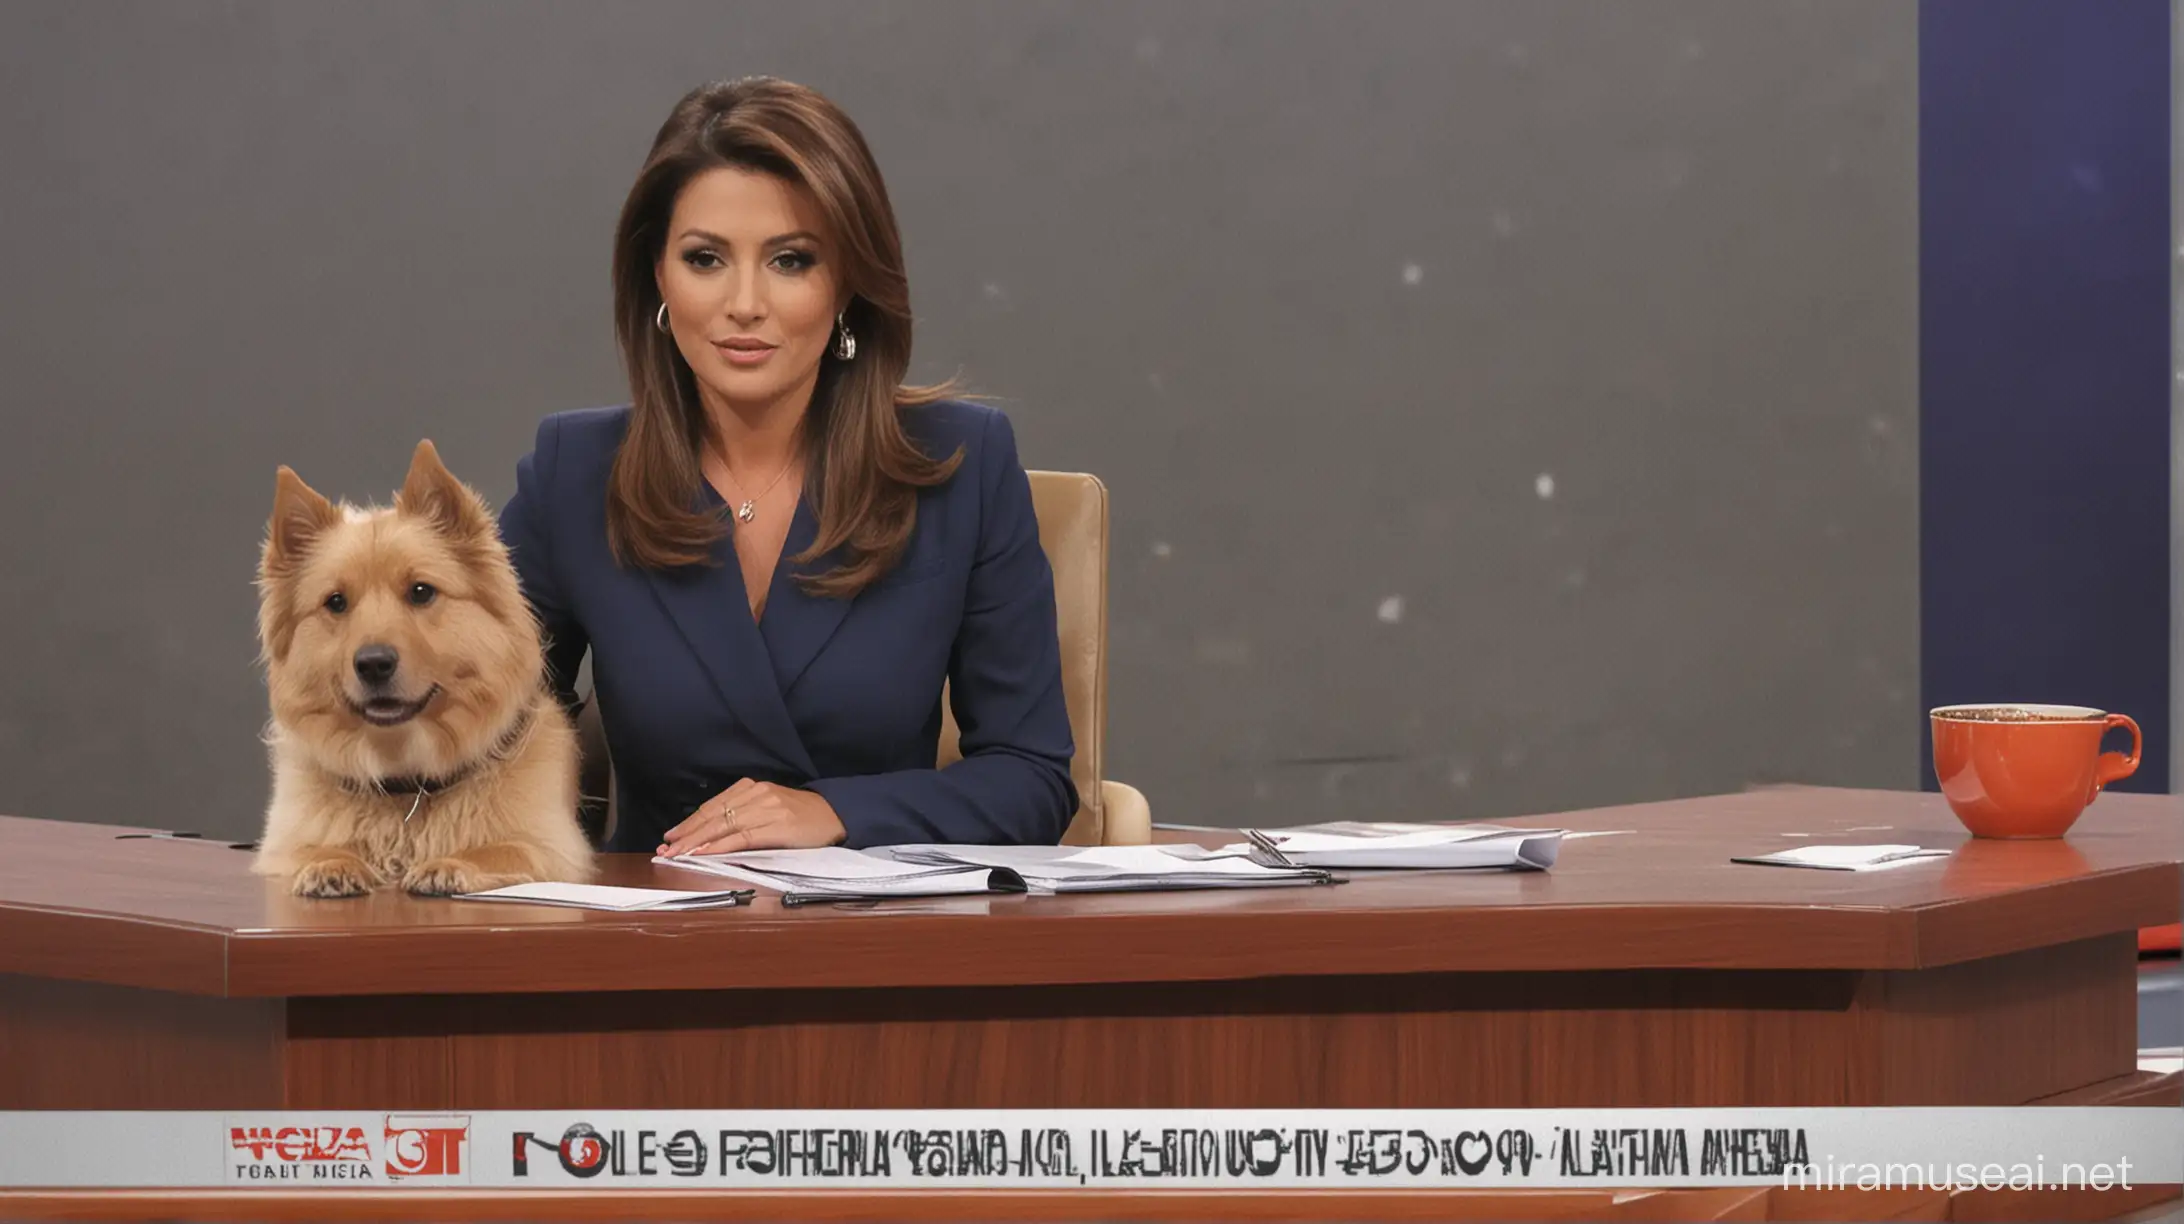 Live TV Broadcast Interrupted As Dog Poops On female Anchor's Desk In Bolivia